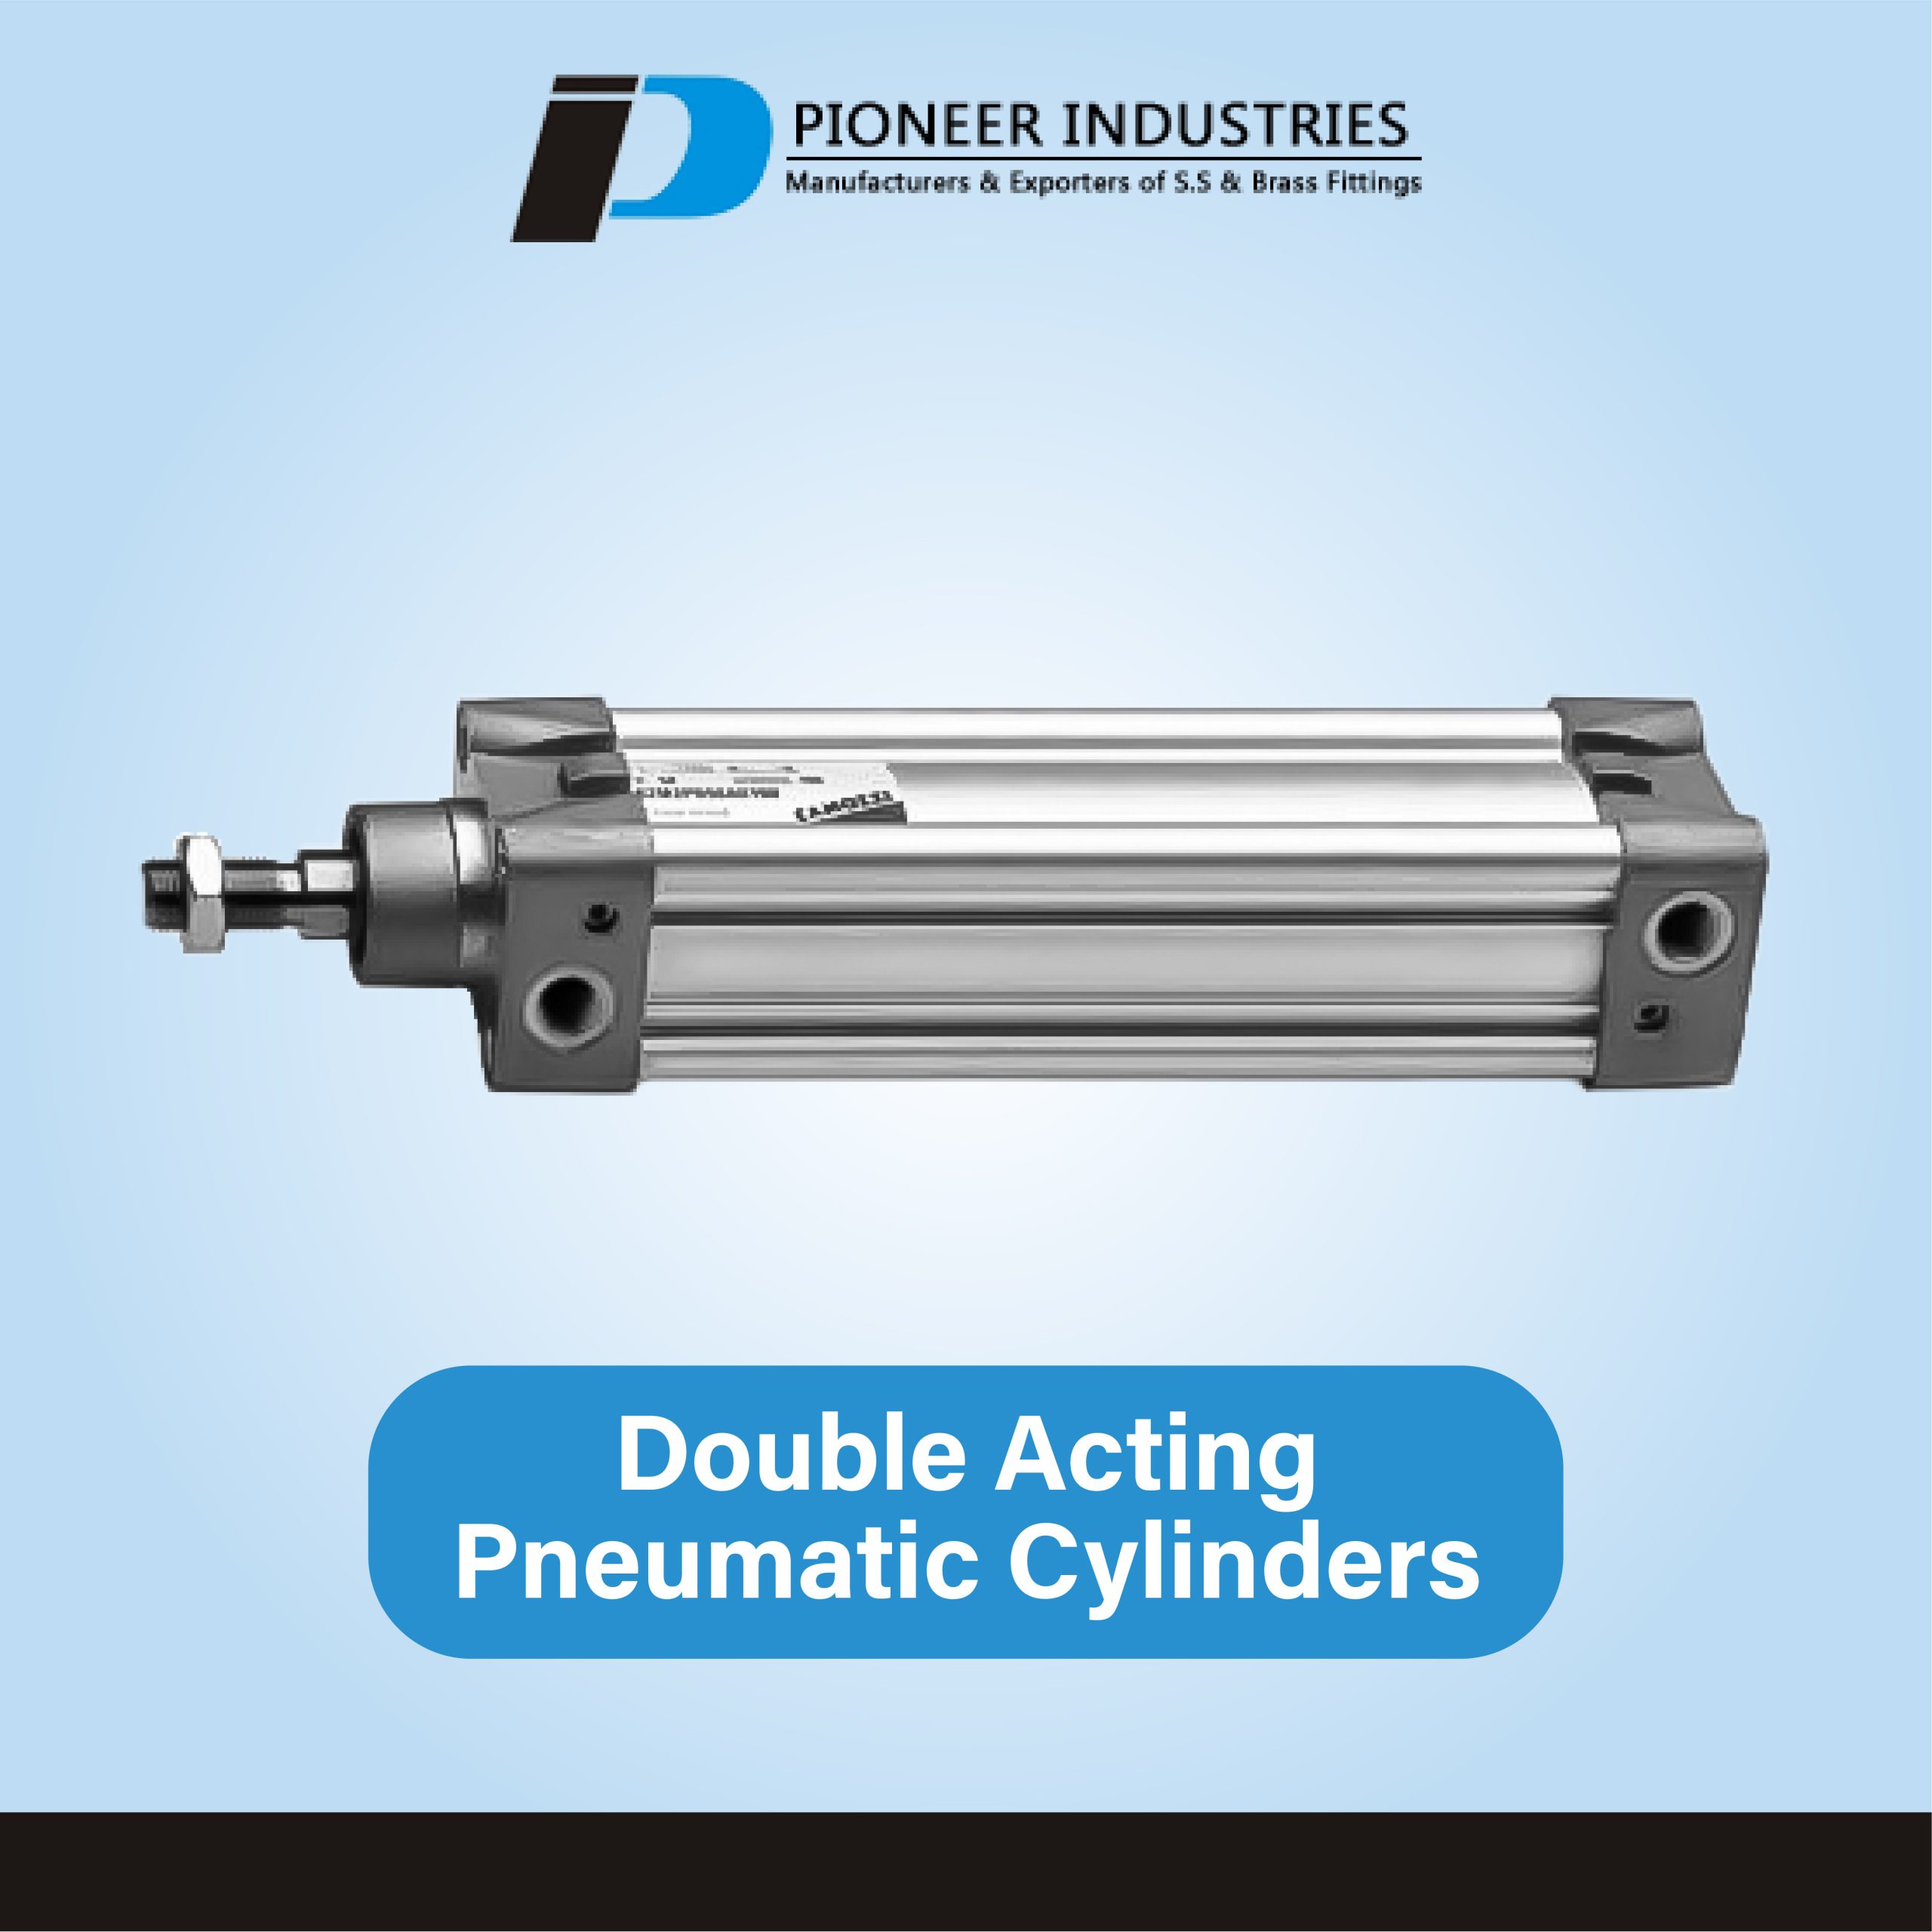 Double Acting Pneumatic Cylinders